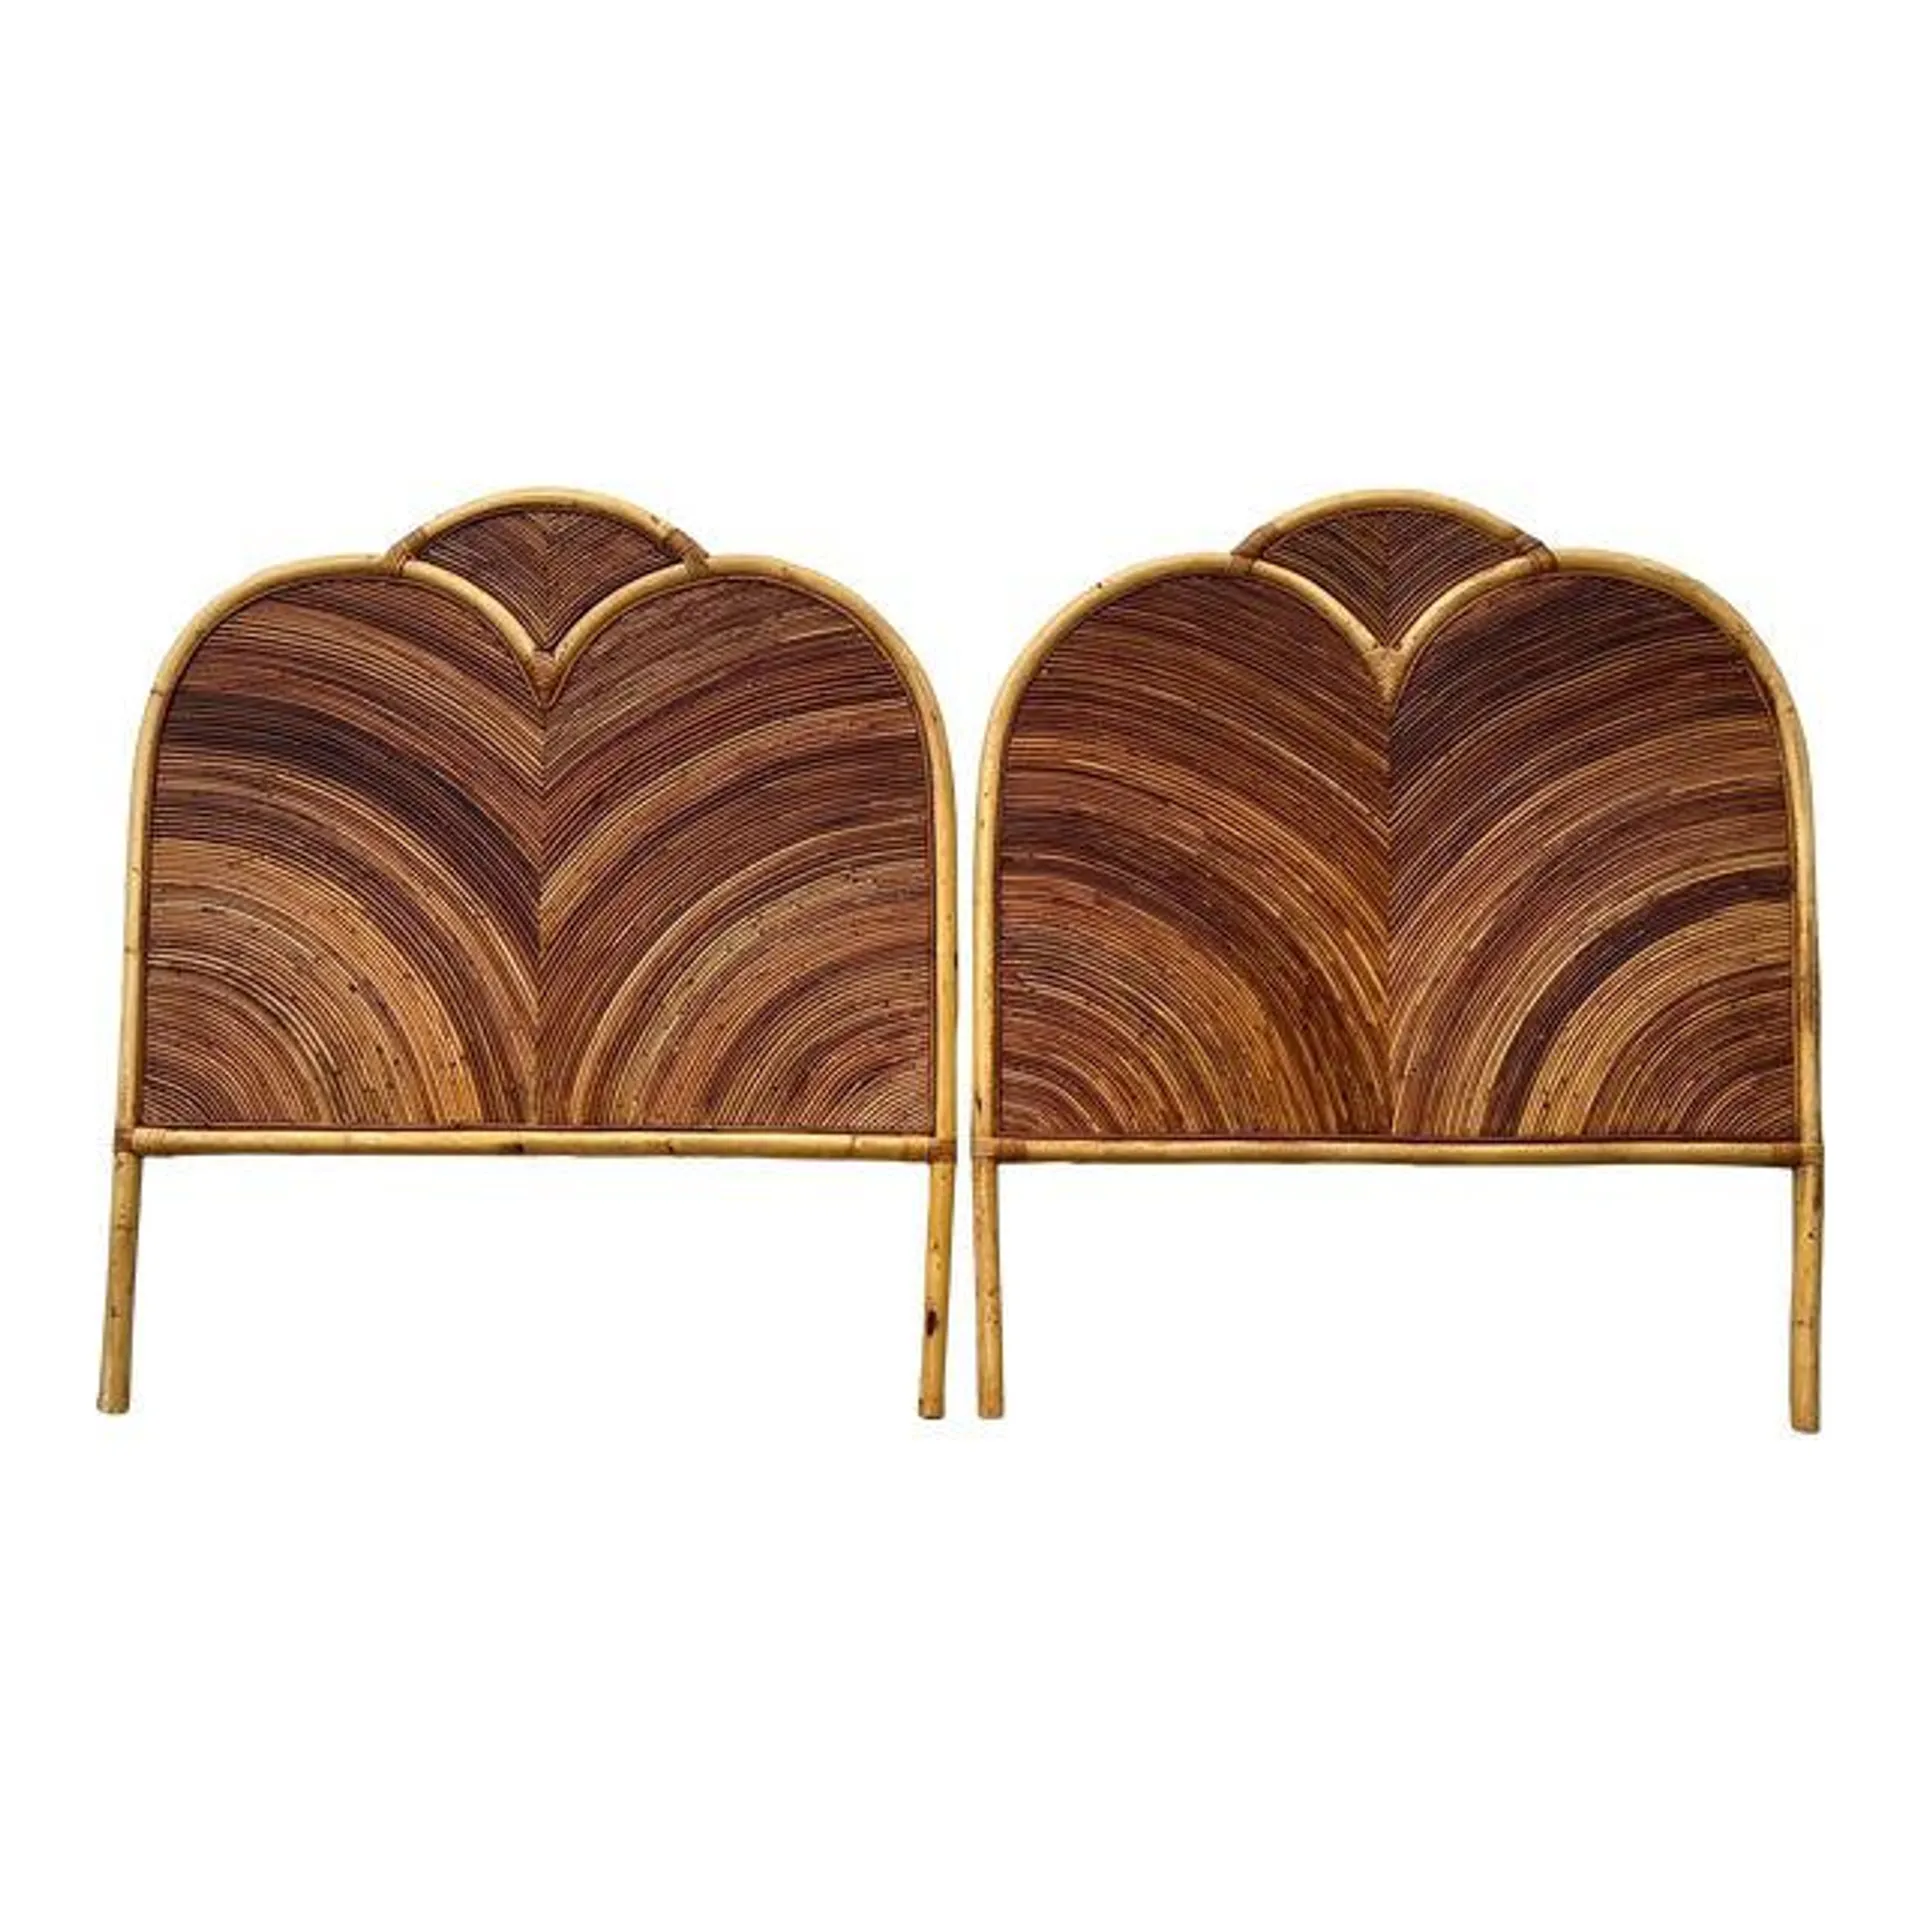 1960s Pair of Rattan Pencil Reed Headboards in the Style of Gabriella Crespi